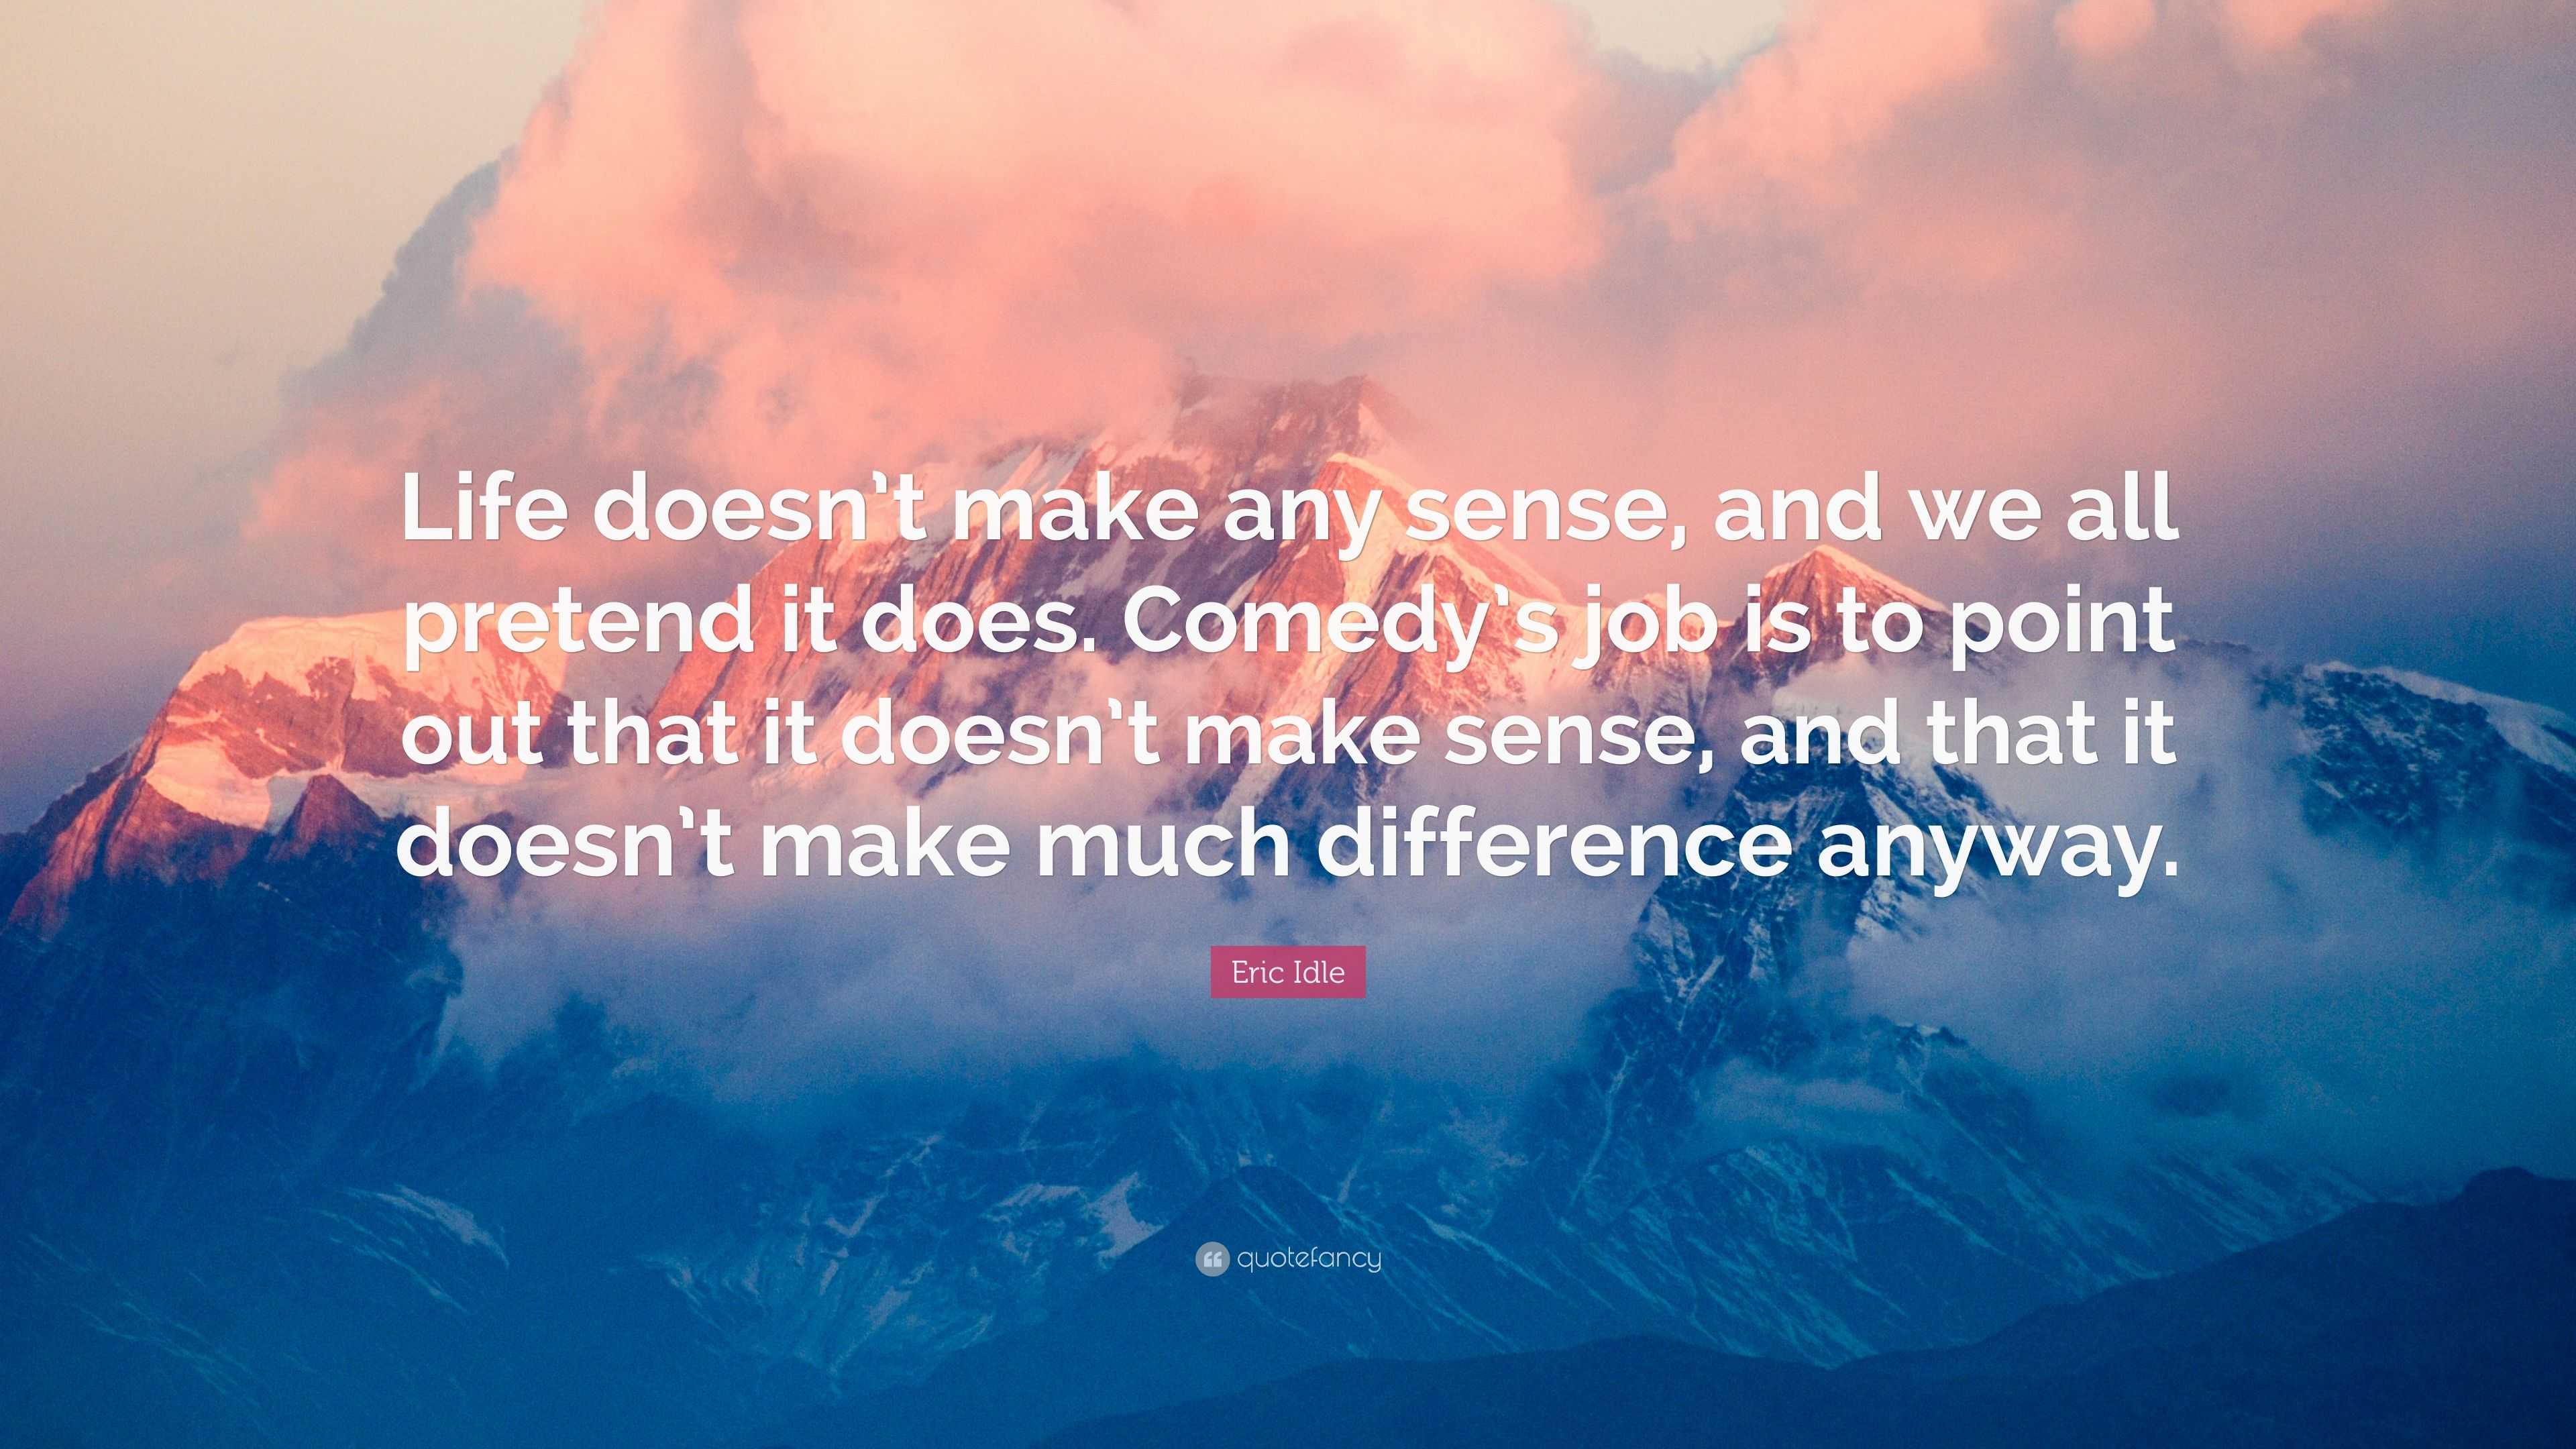 Eric Idle Quote “Life doesn t make any sense and we all